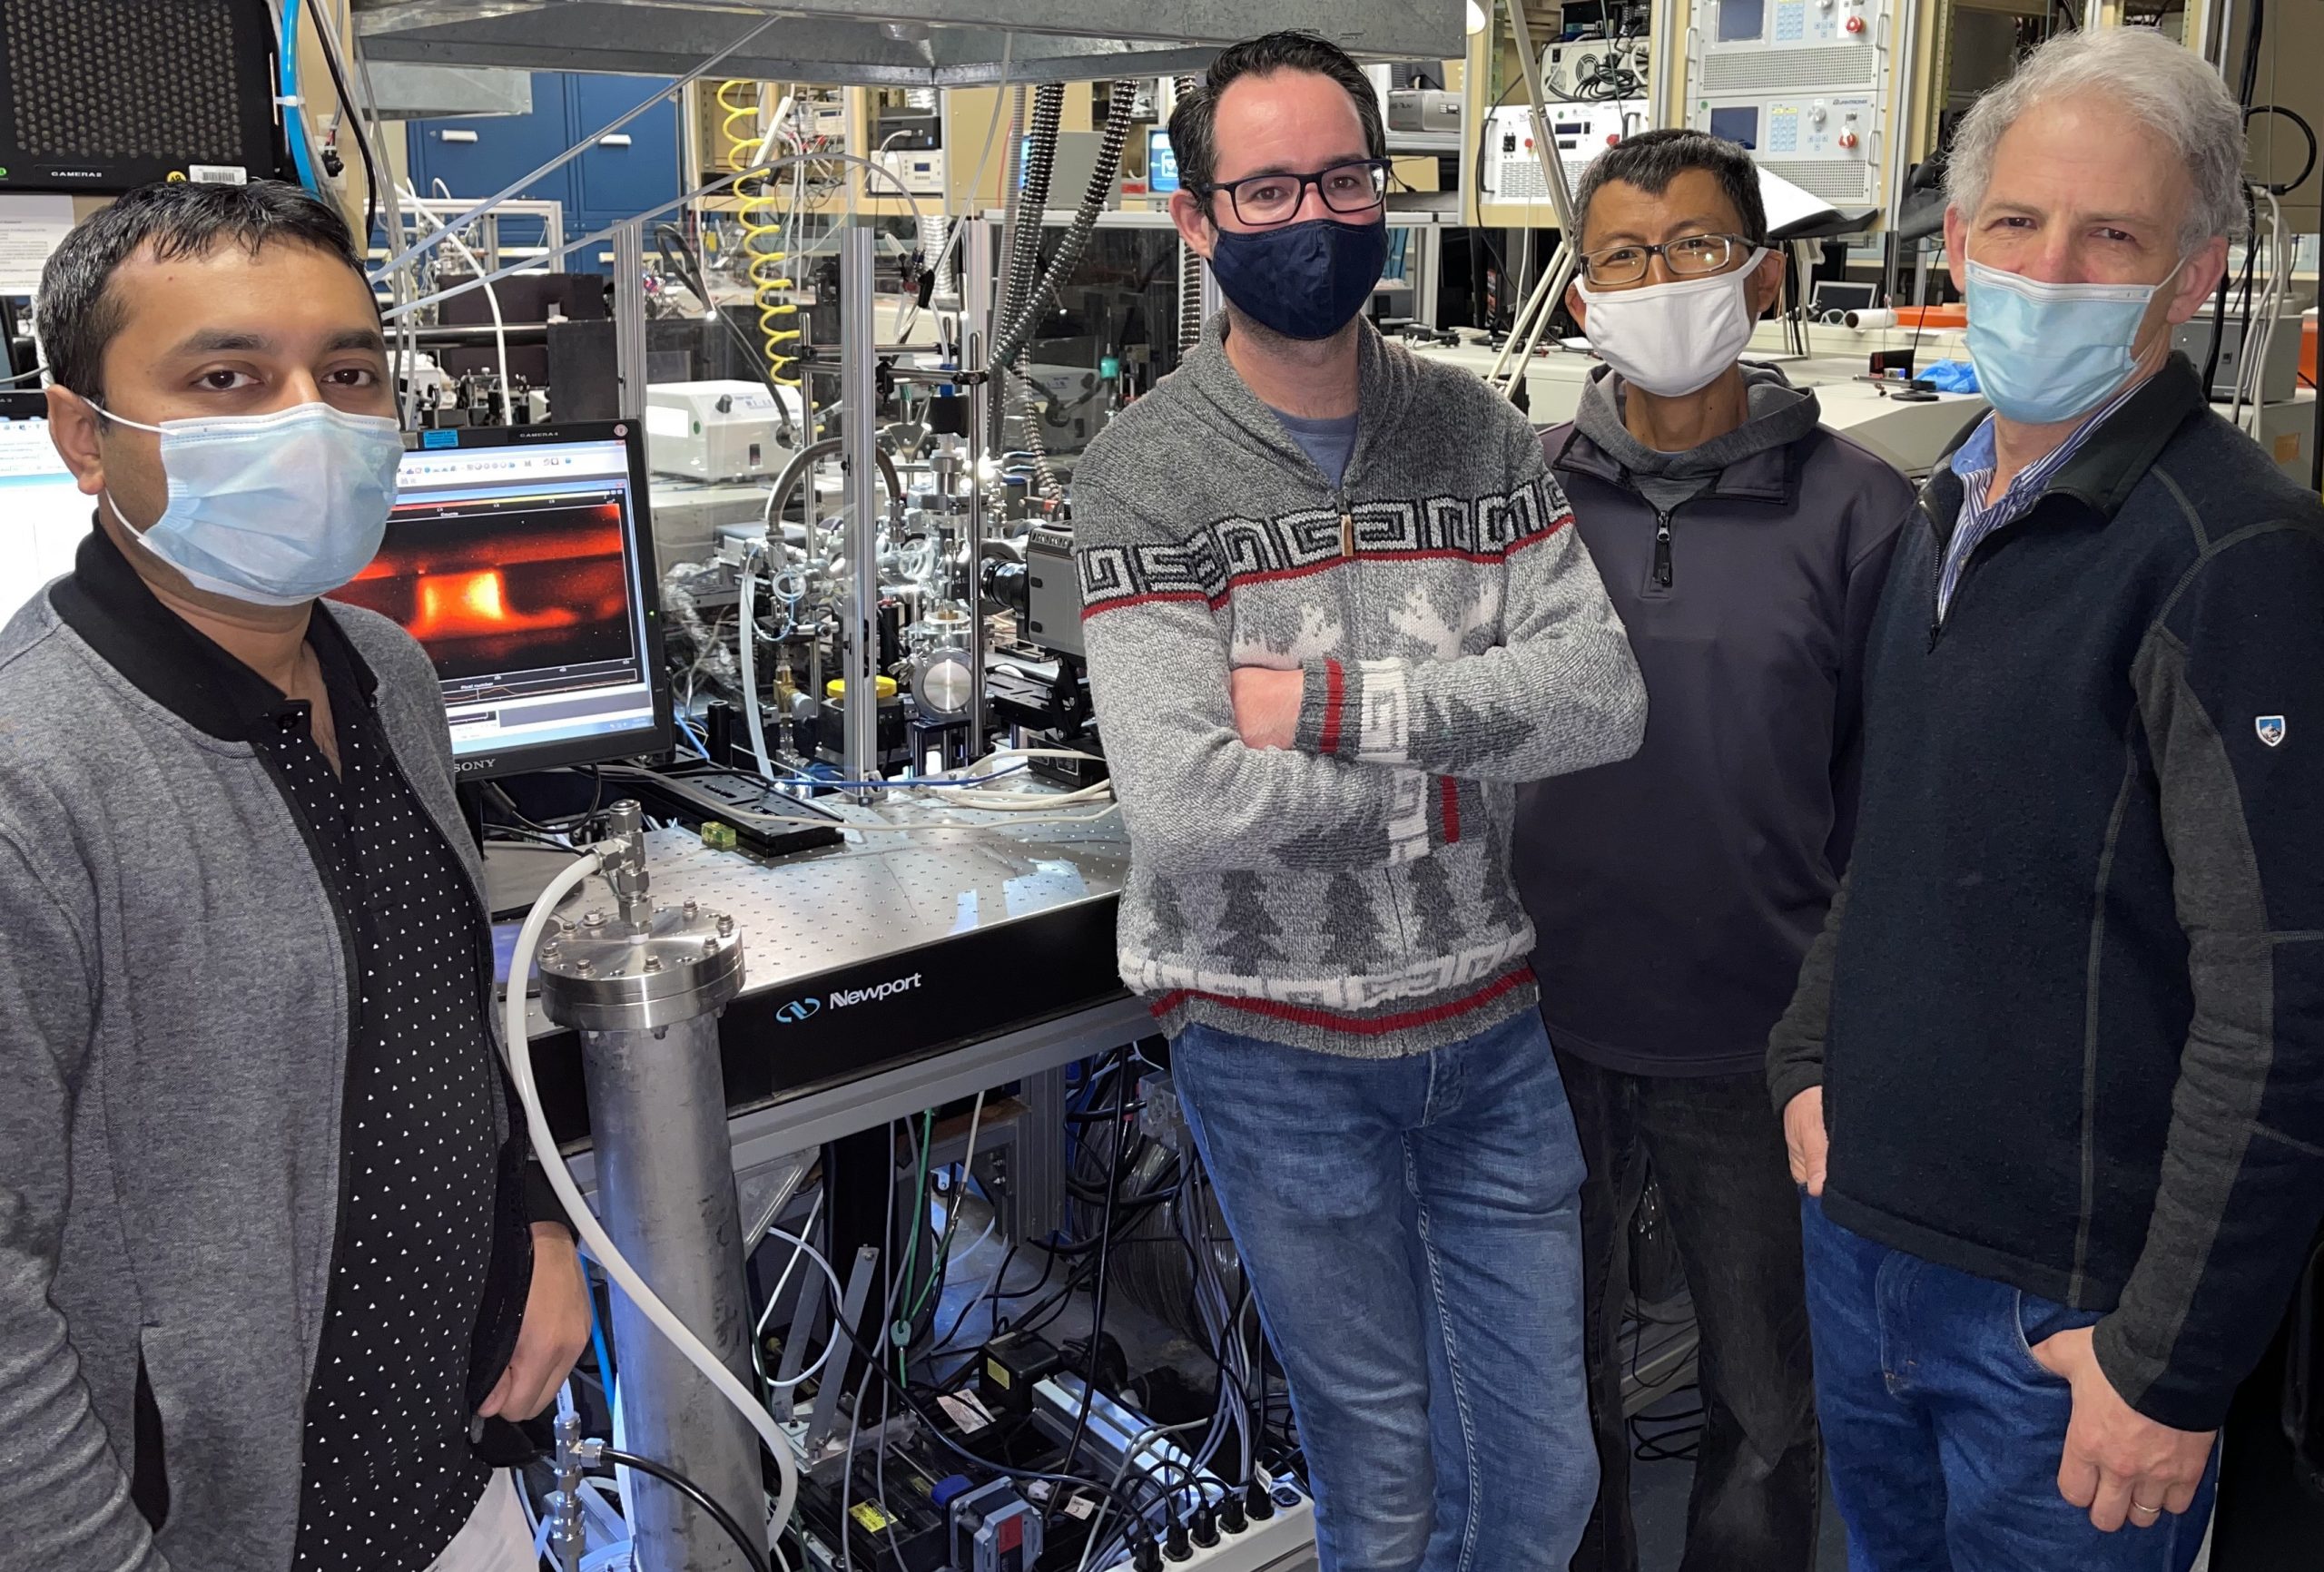 Four people posing for a picture in a lab as part of a team with Jonathan Frank. Instruments behind them